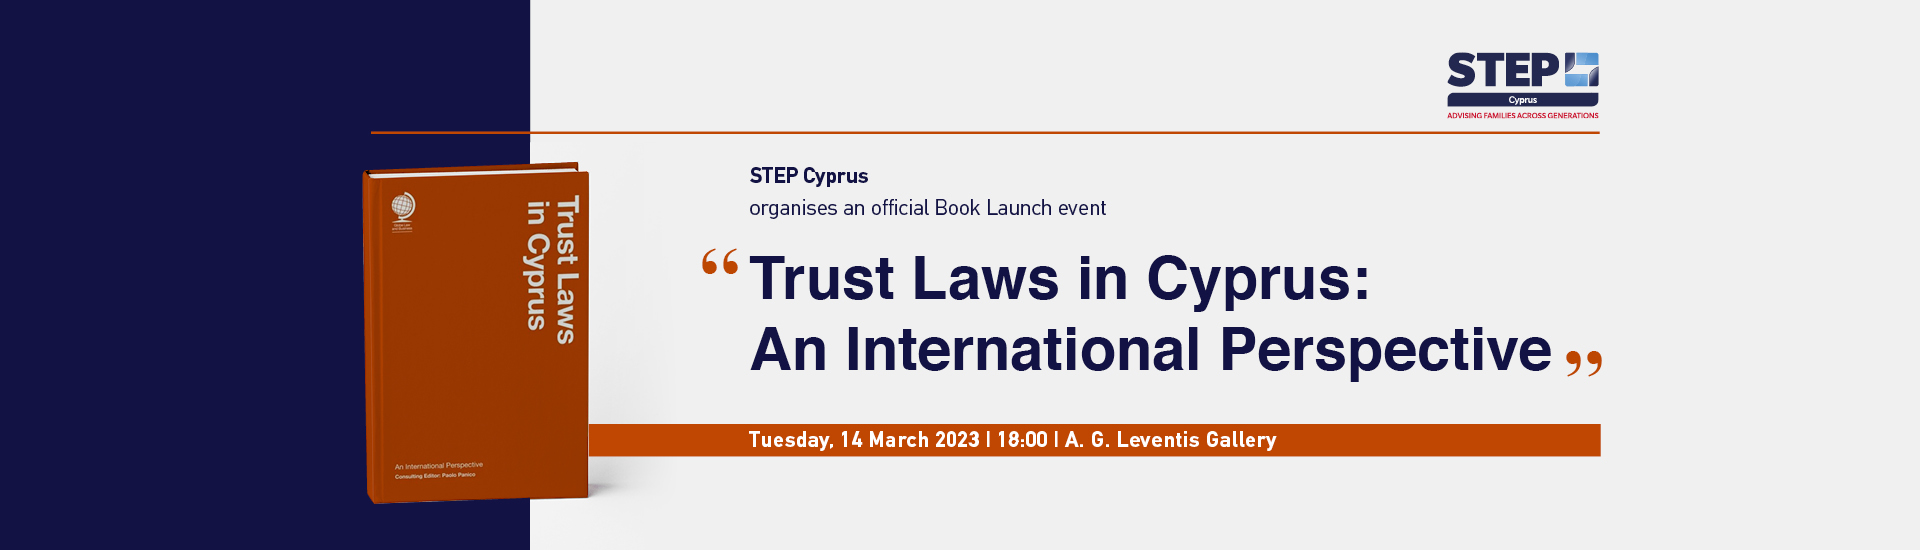 Book Launch Event by STEP Cyprus: “Trust Laws in Cyprus: An International Perspective”